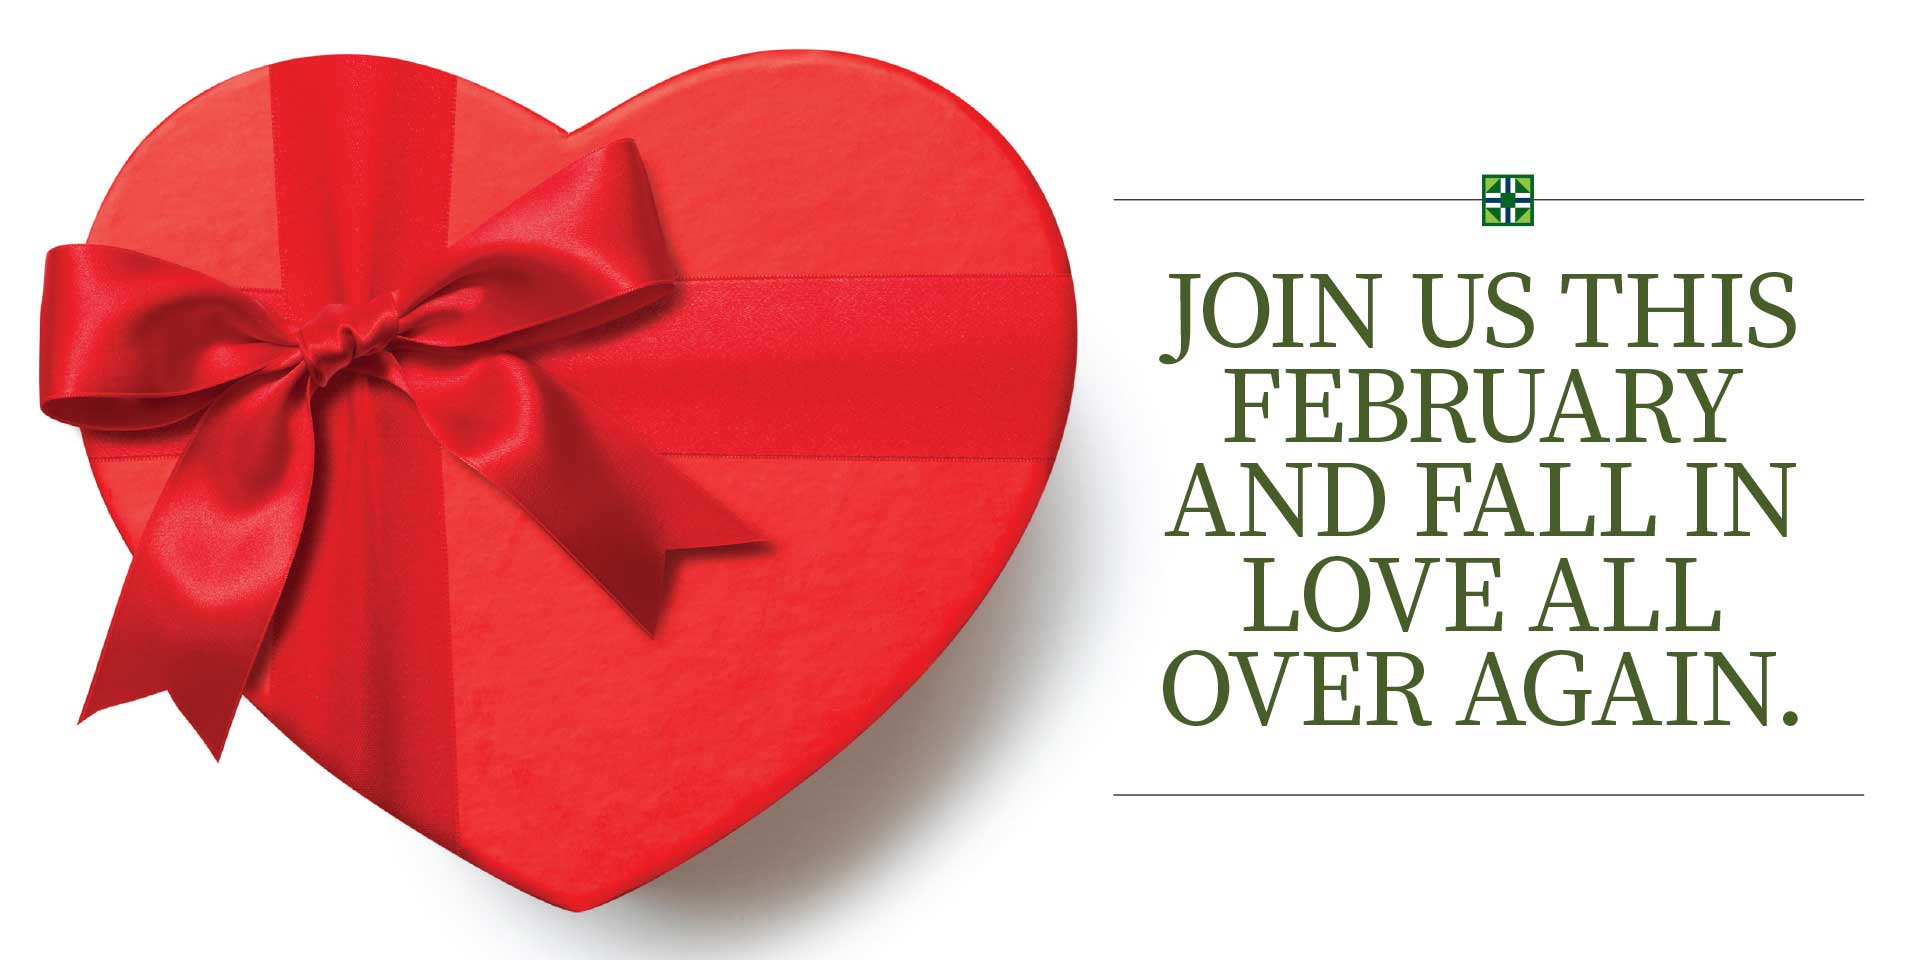 Join us this February and fall in love all over again.